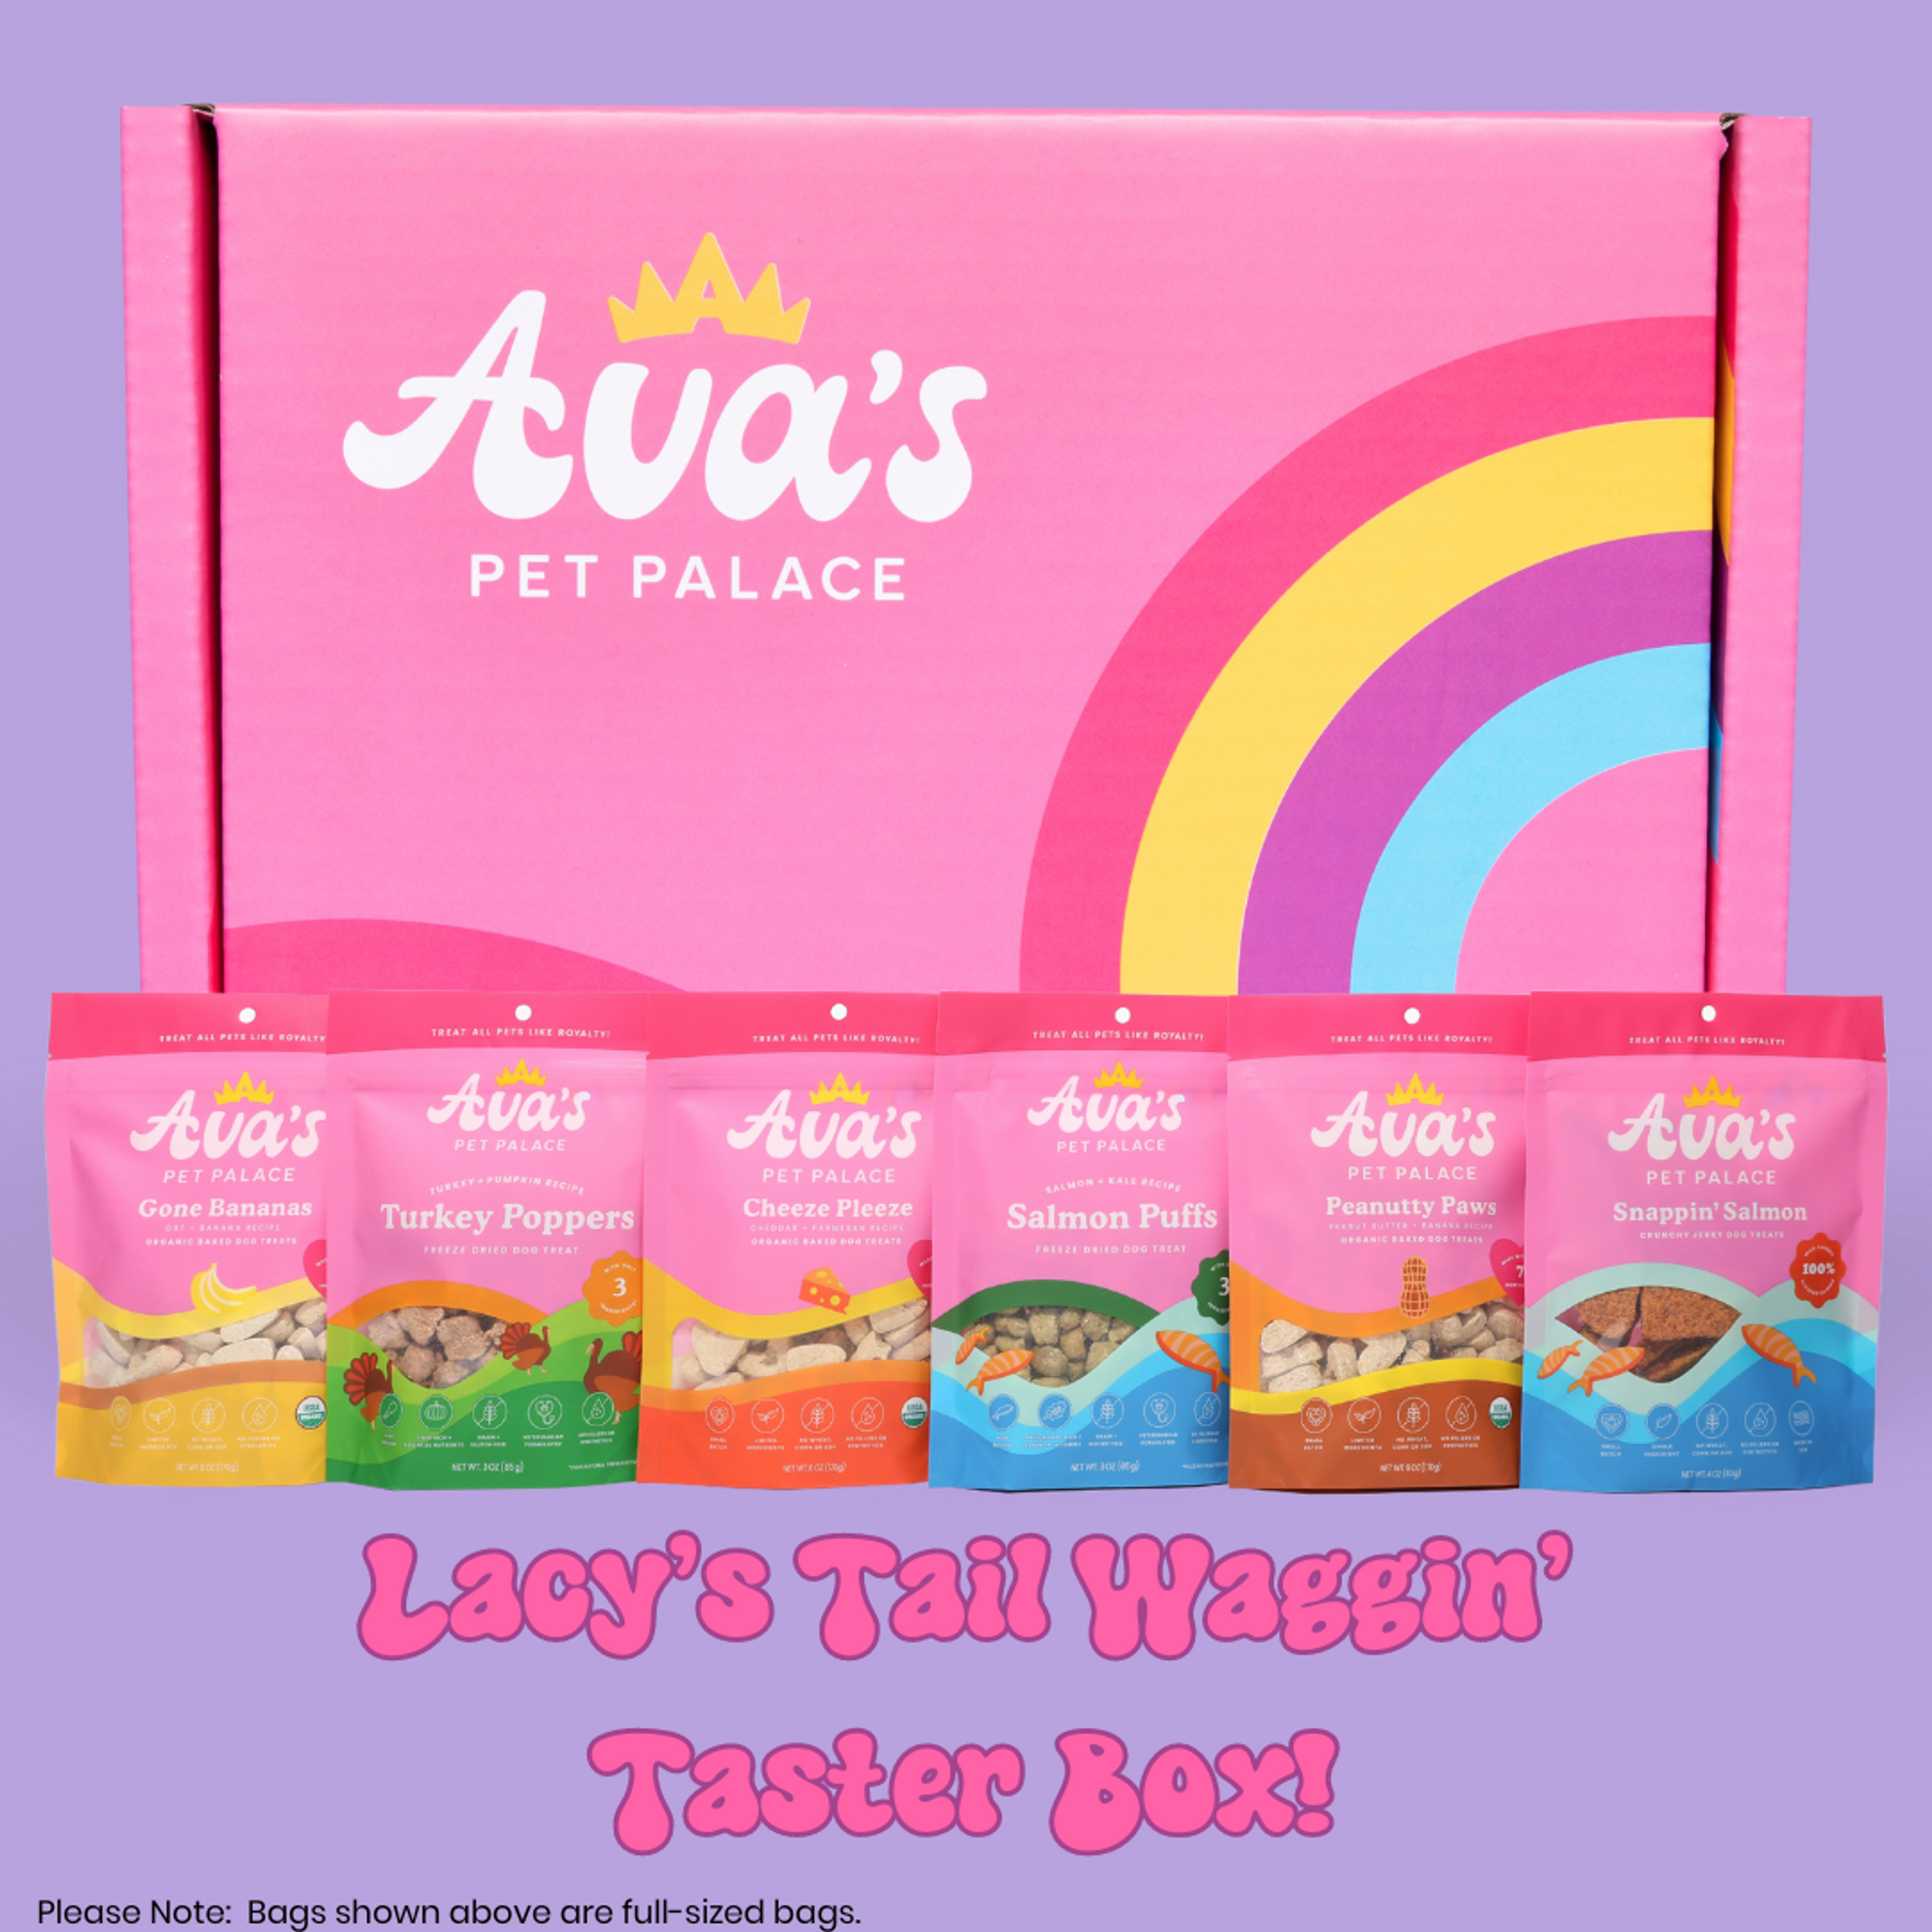 Lacy's Tail Waggin' Taster Box